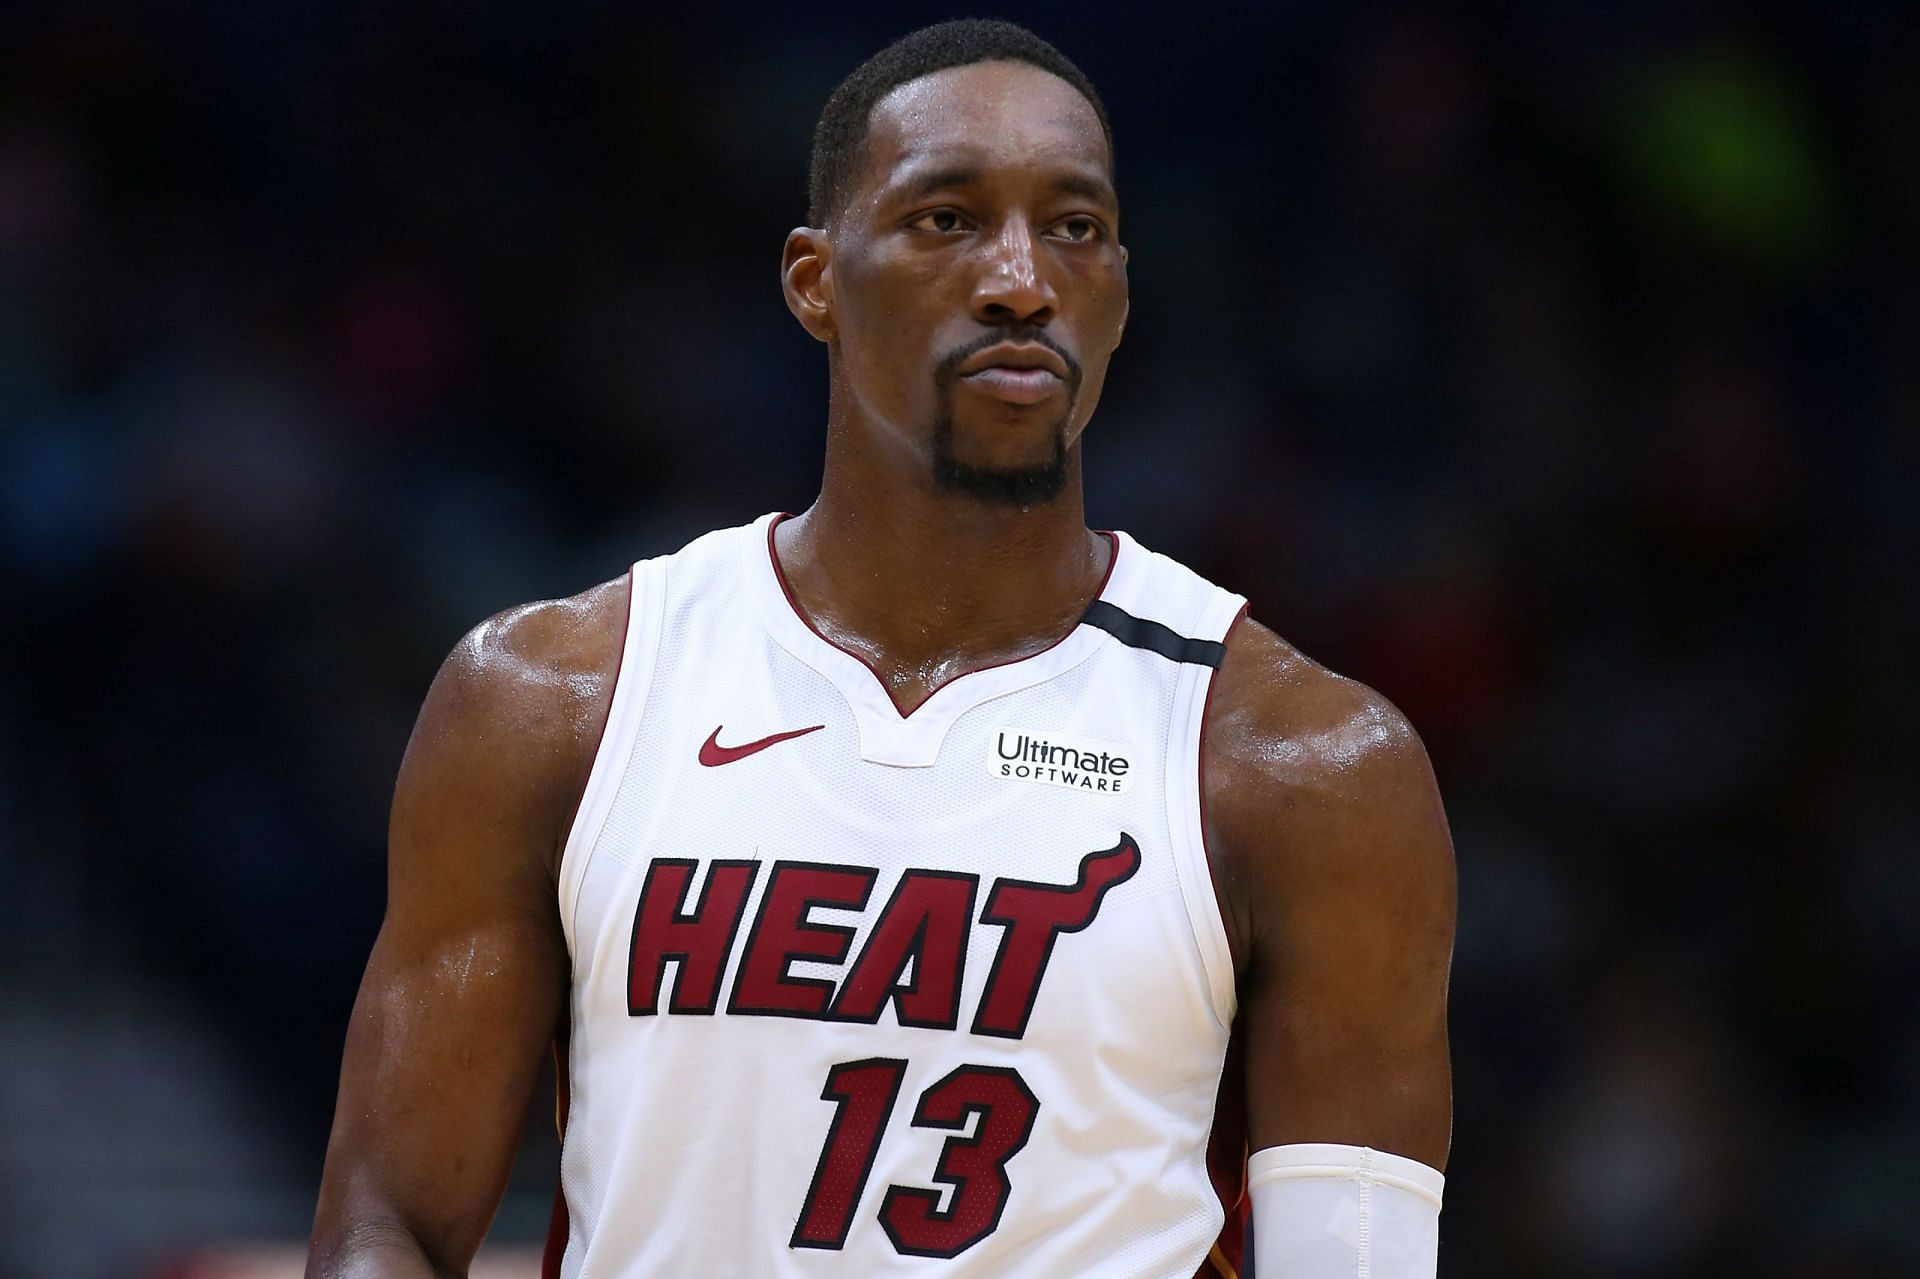 Miami Heat center Bam Adebayo continues to impress with his play